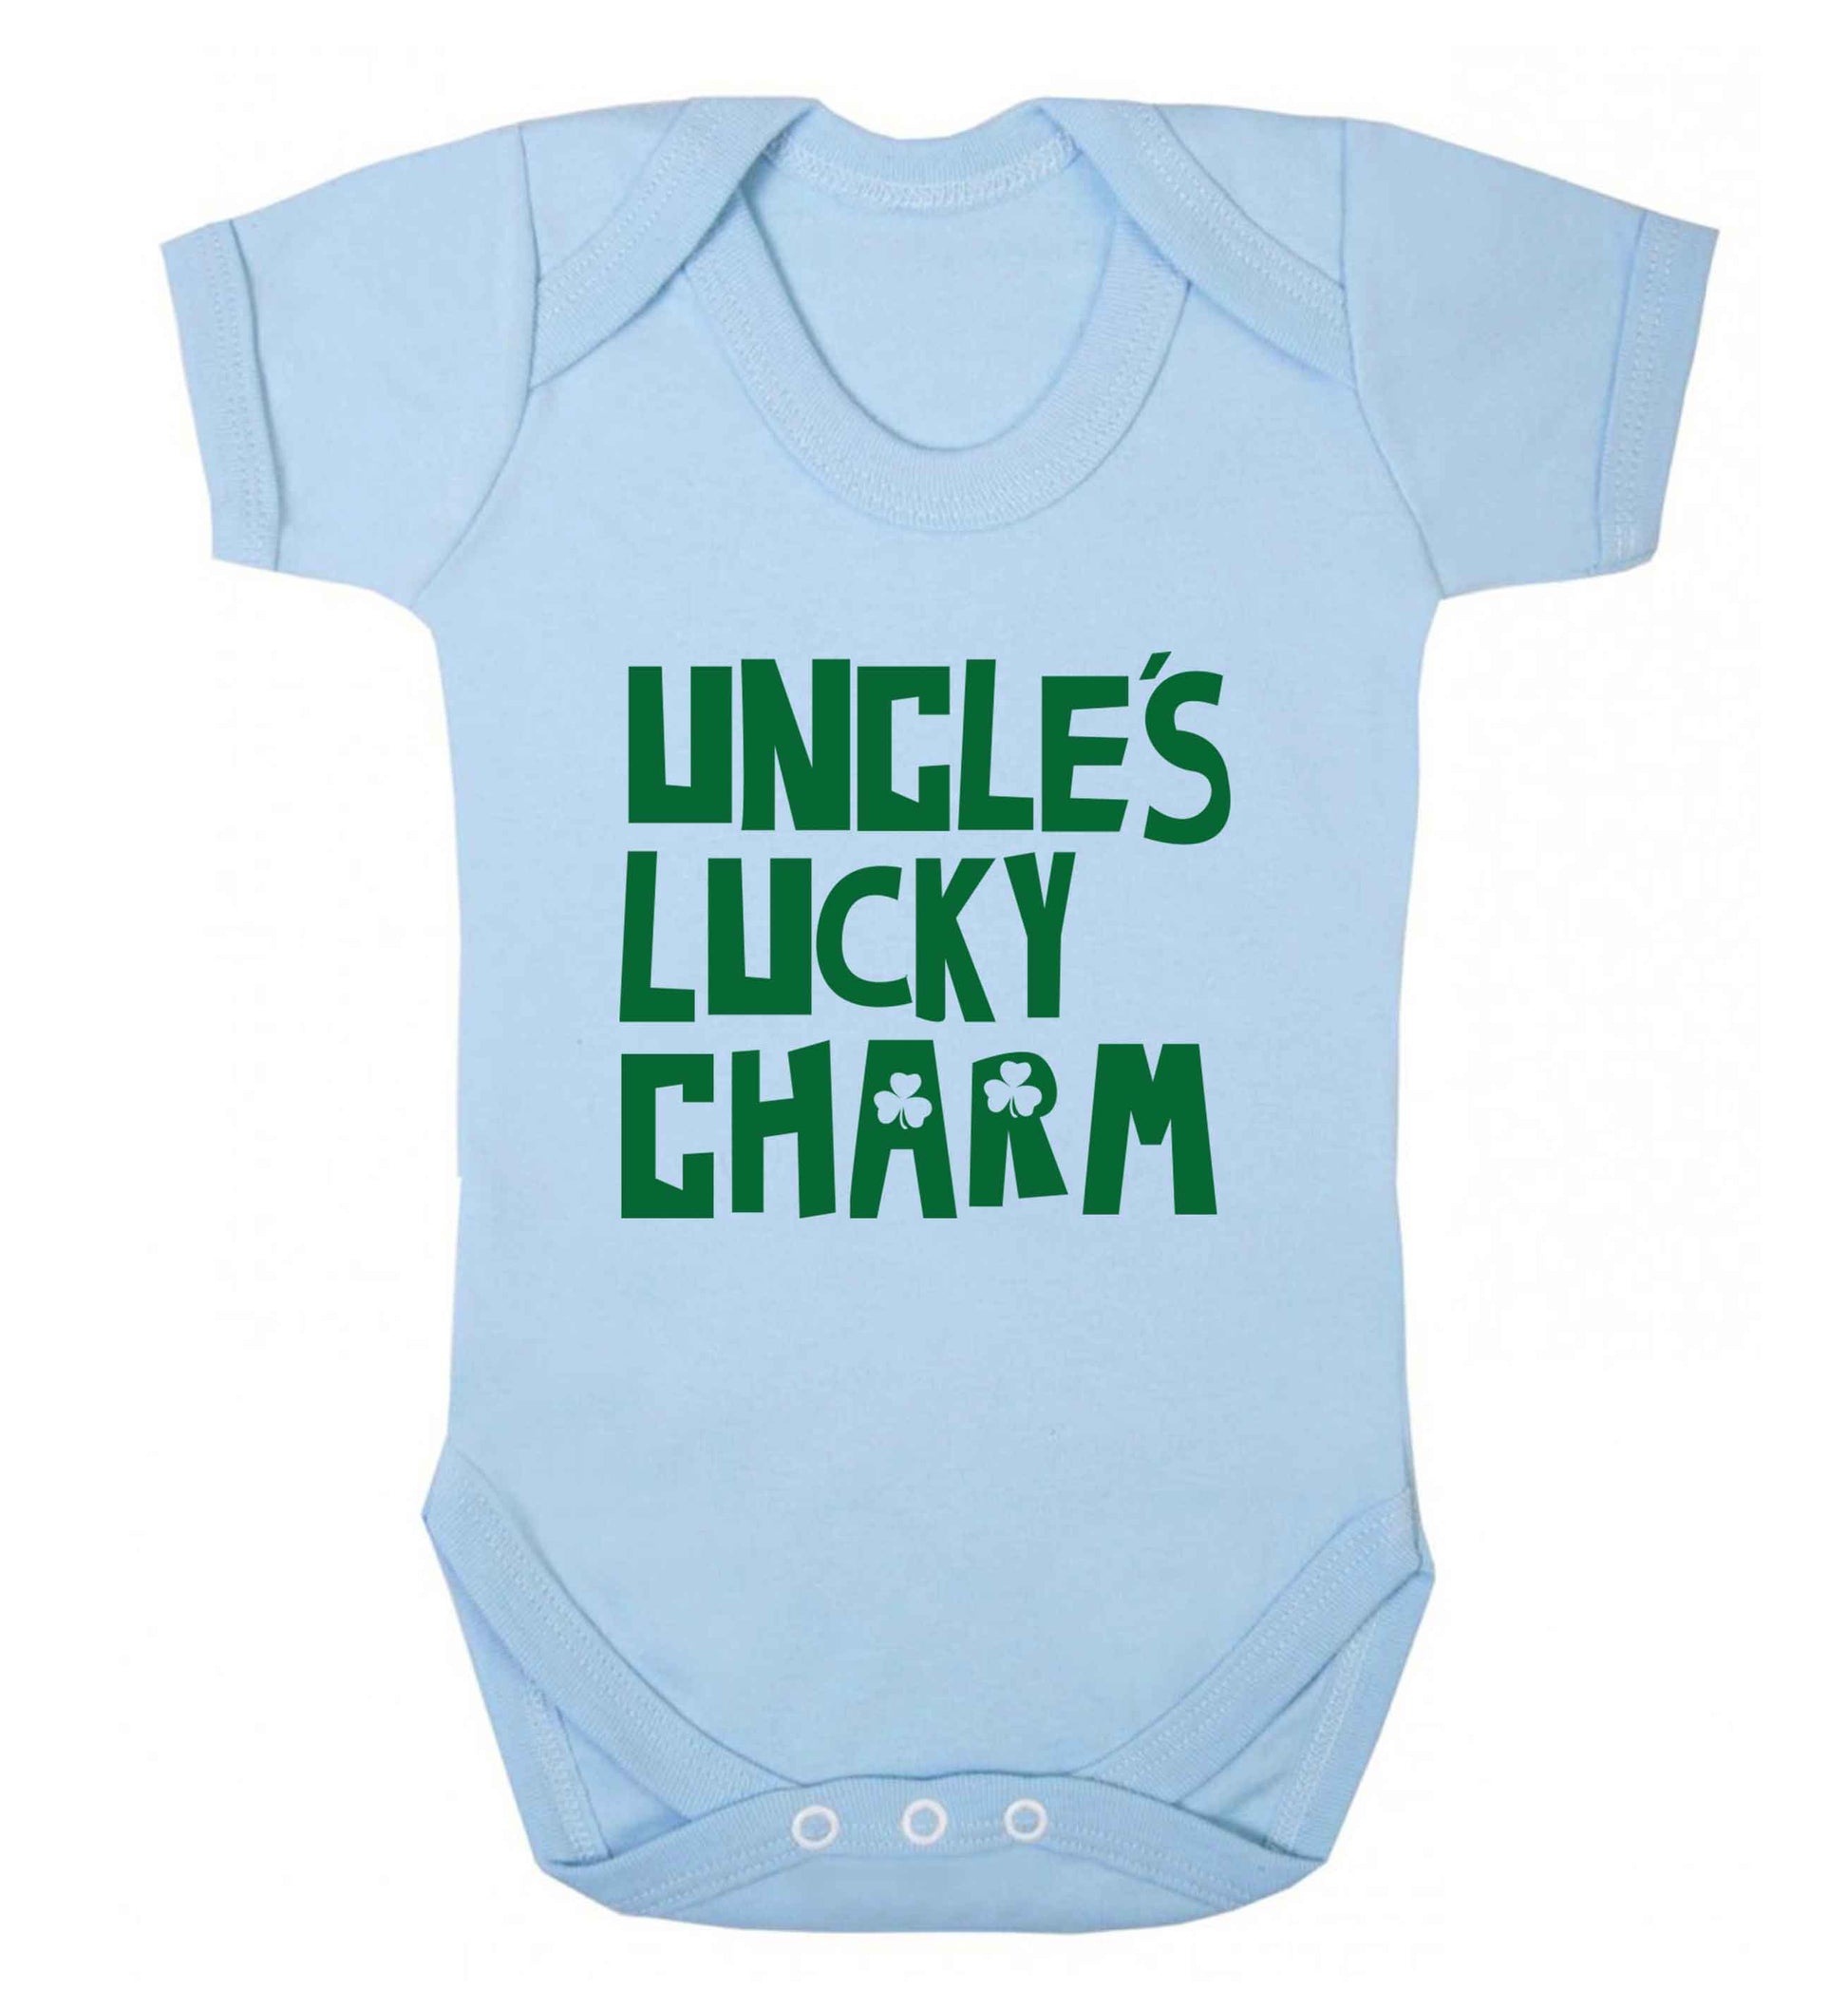 Uncles lucky charm baby vest pale blue 18-24 months